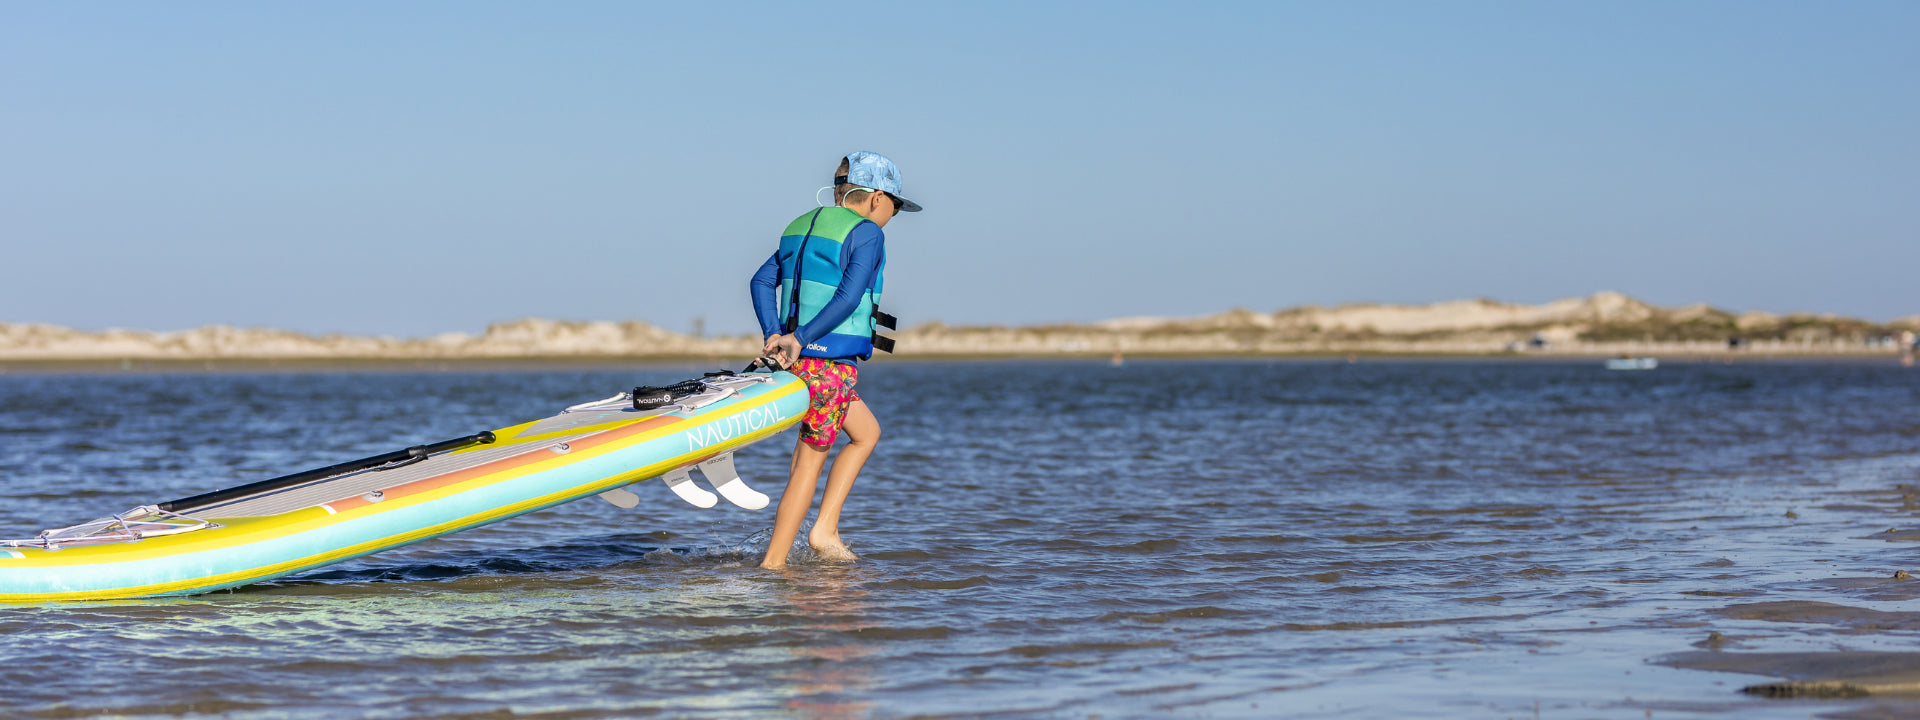 Little boy carrying a paddle board